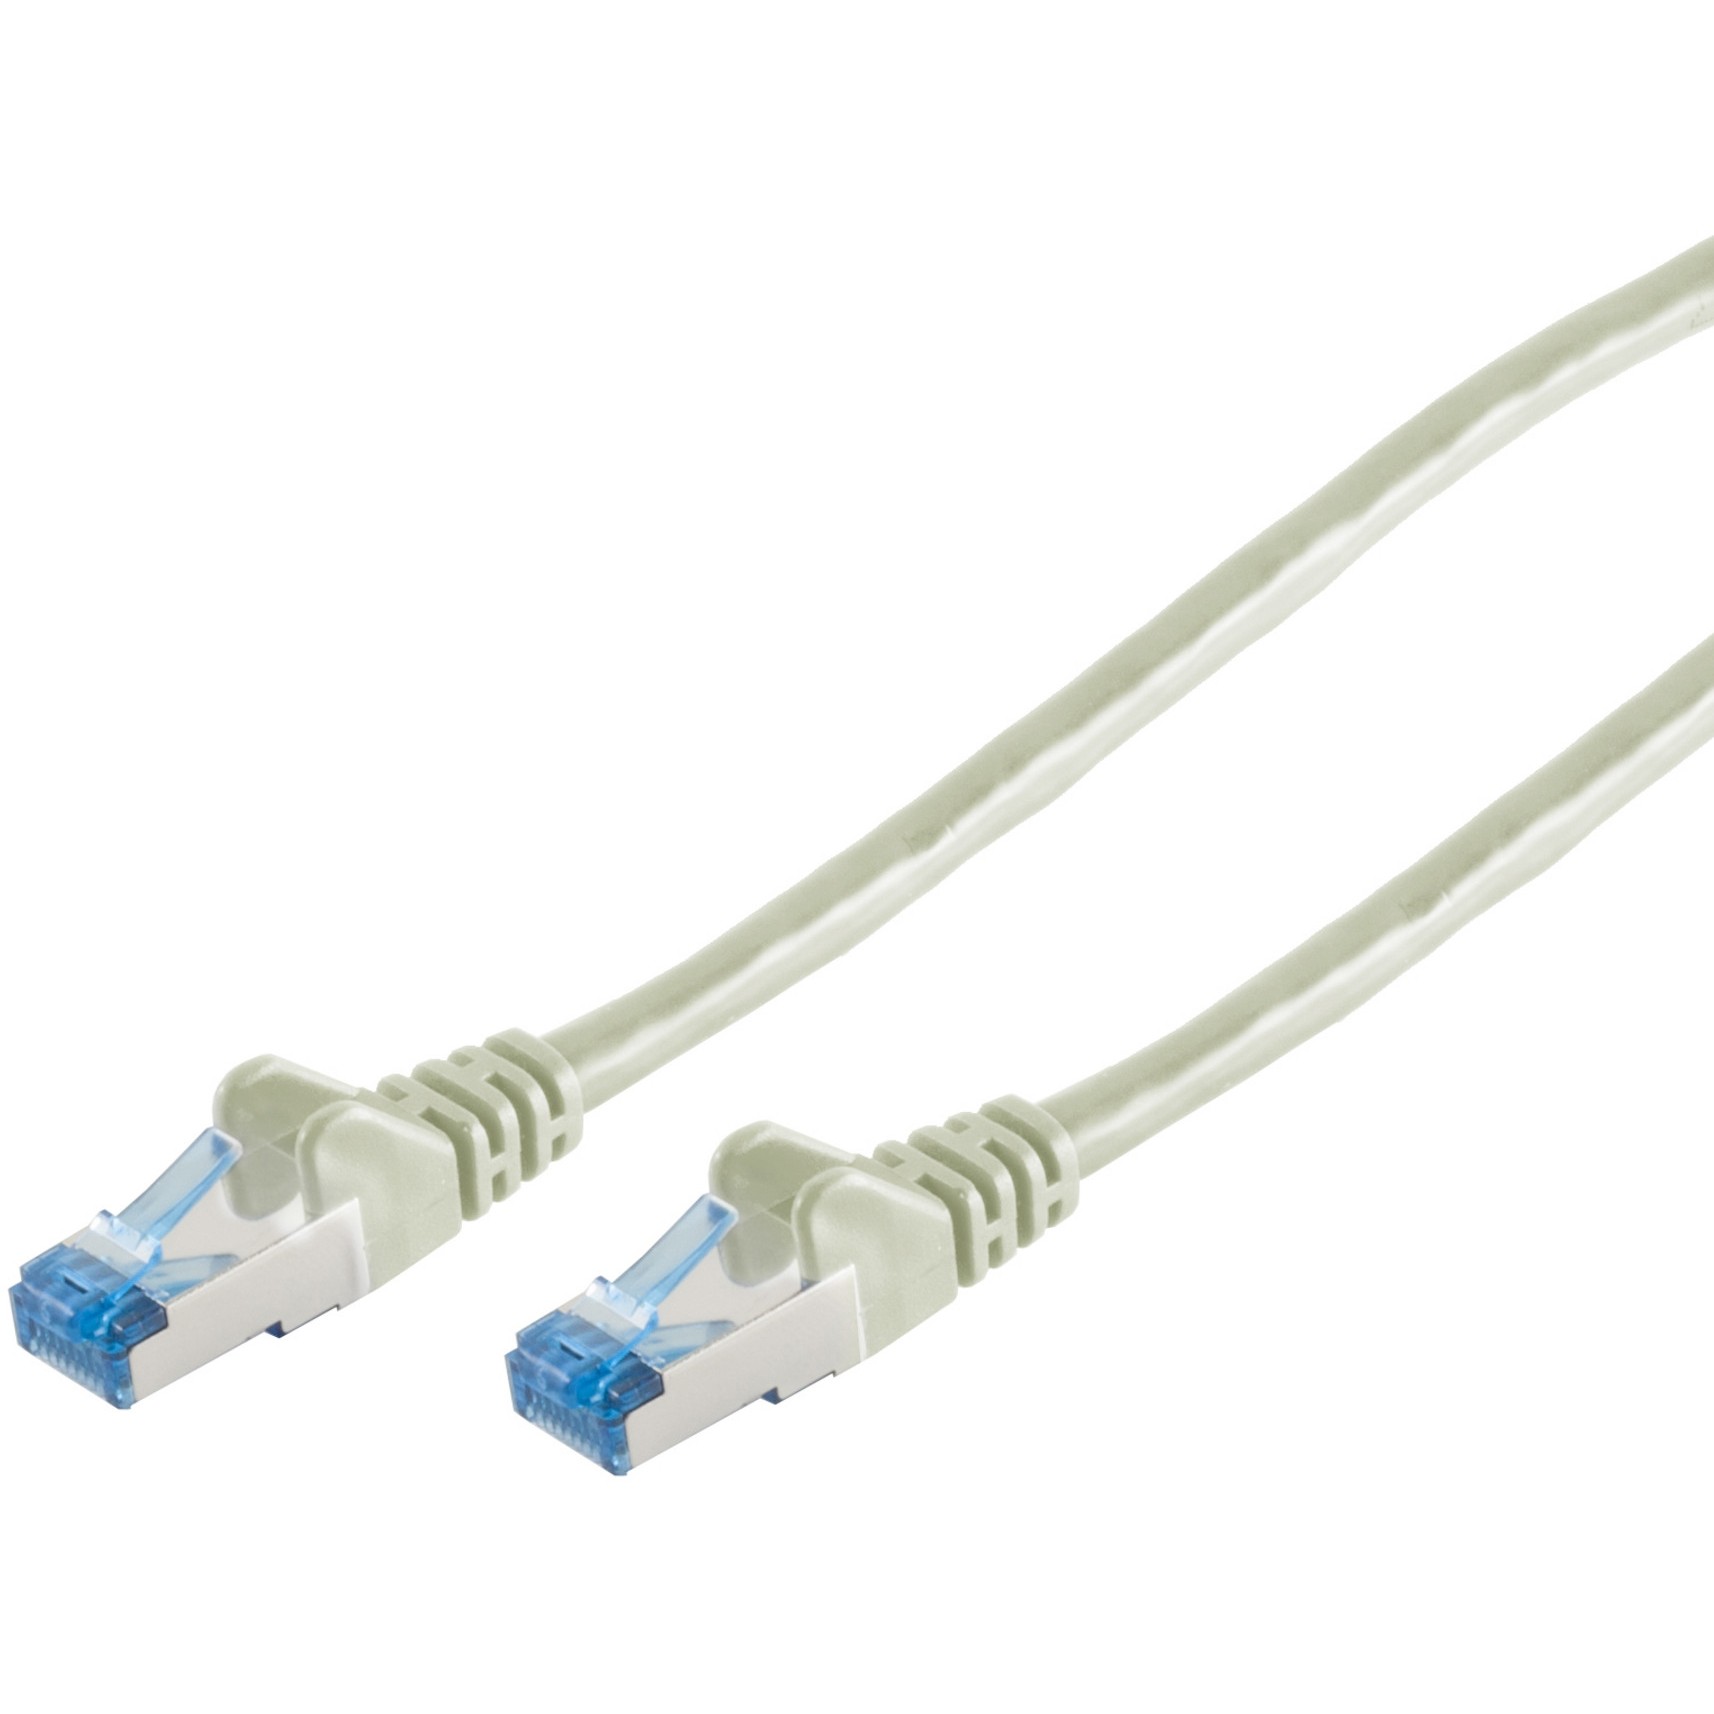 S-Conn 75711 networking cable - 75711